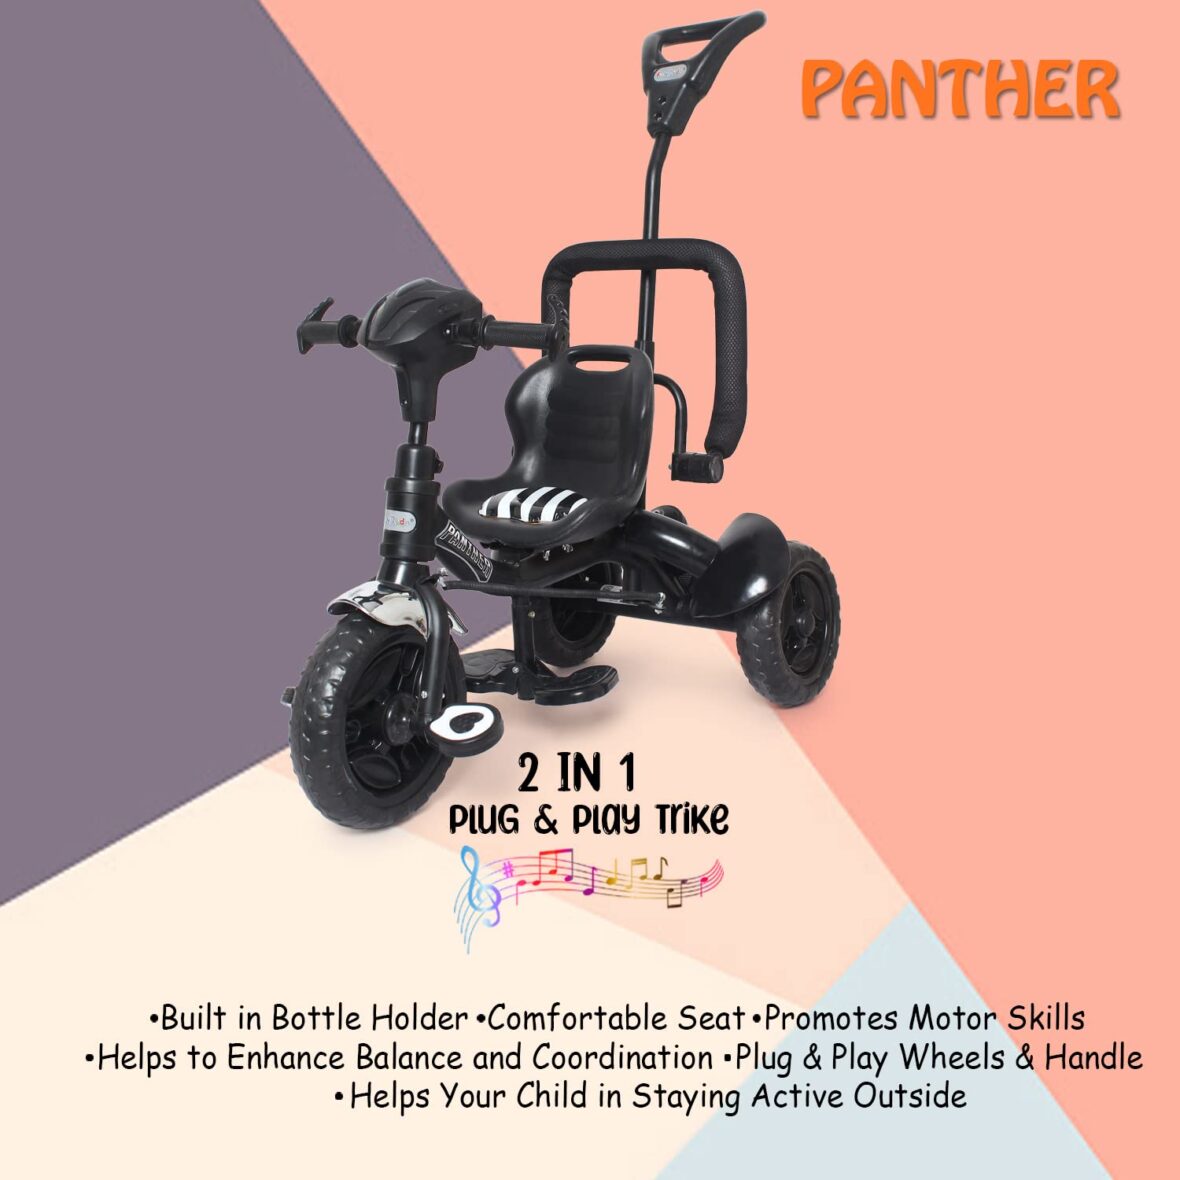 FunRide Kids Tricycle Rider Panther with Removable Parental Control Handle (6)